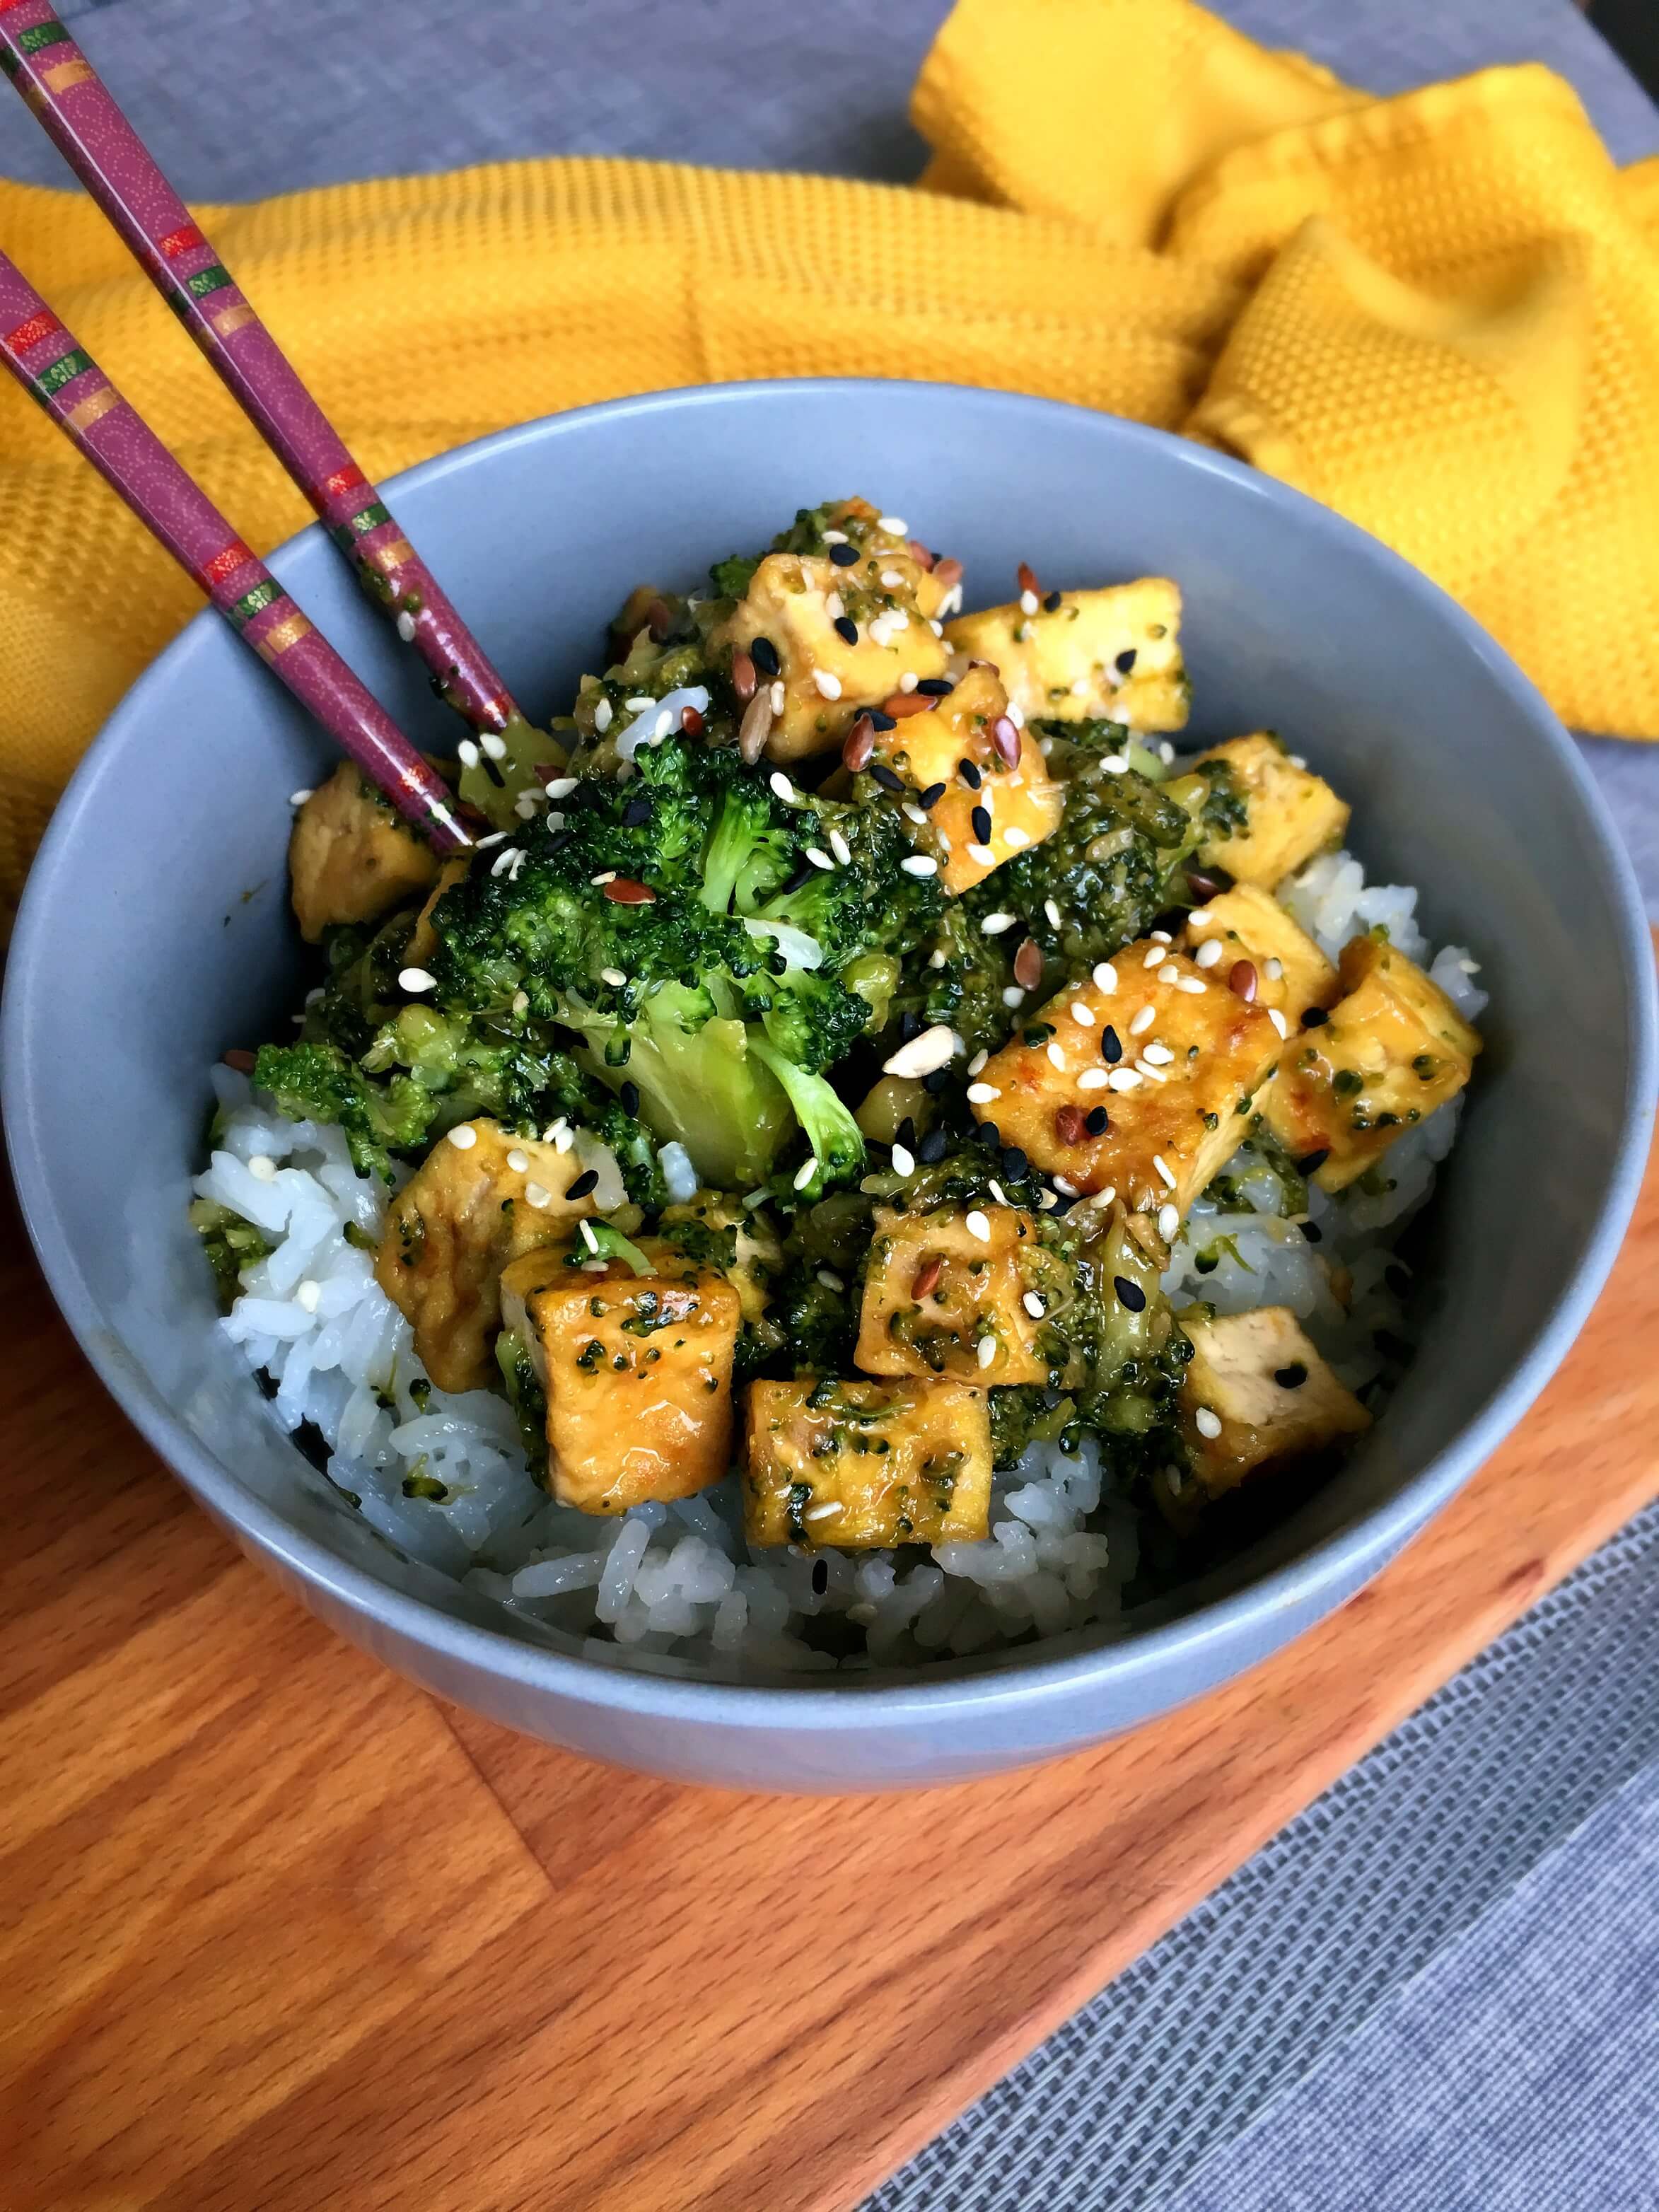 Vegan Soy Sauce Tofu Broccoli Bowl with Sesame Seeds and Ginger - a flavorful, easy, cheap, high protein Asian dinner that is perfect for meal prep. You can make it in less than 45 minutes, too! | The Green Loot #vegan